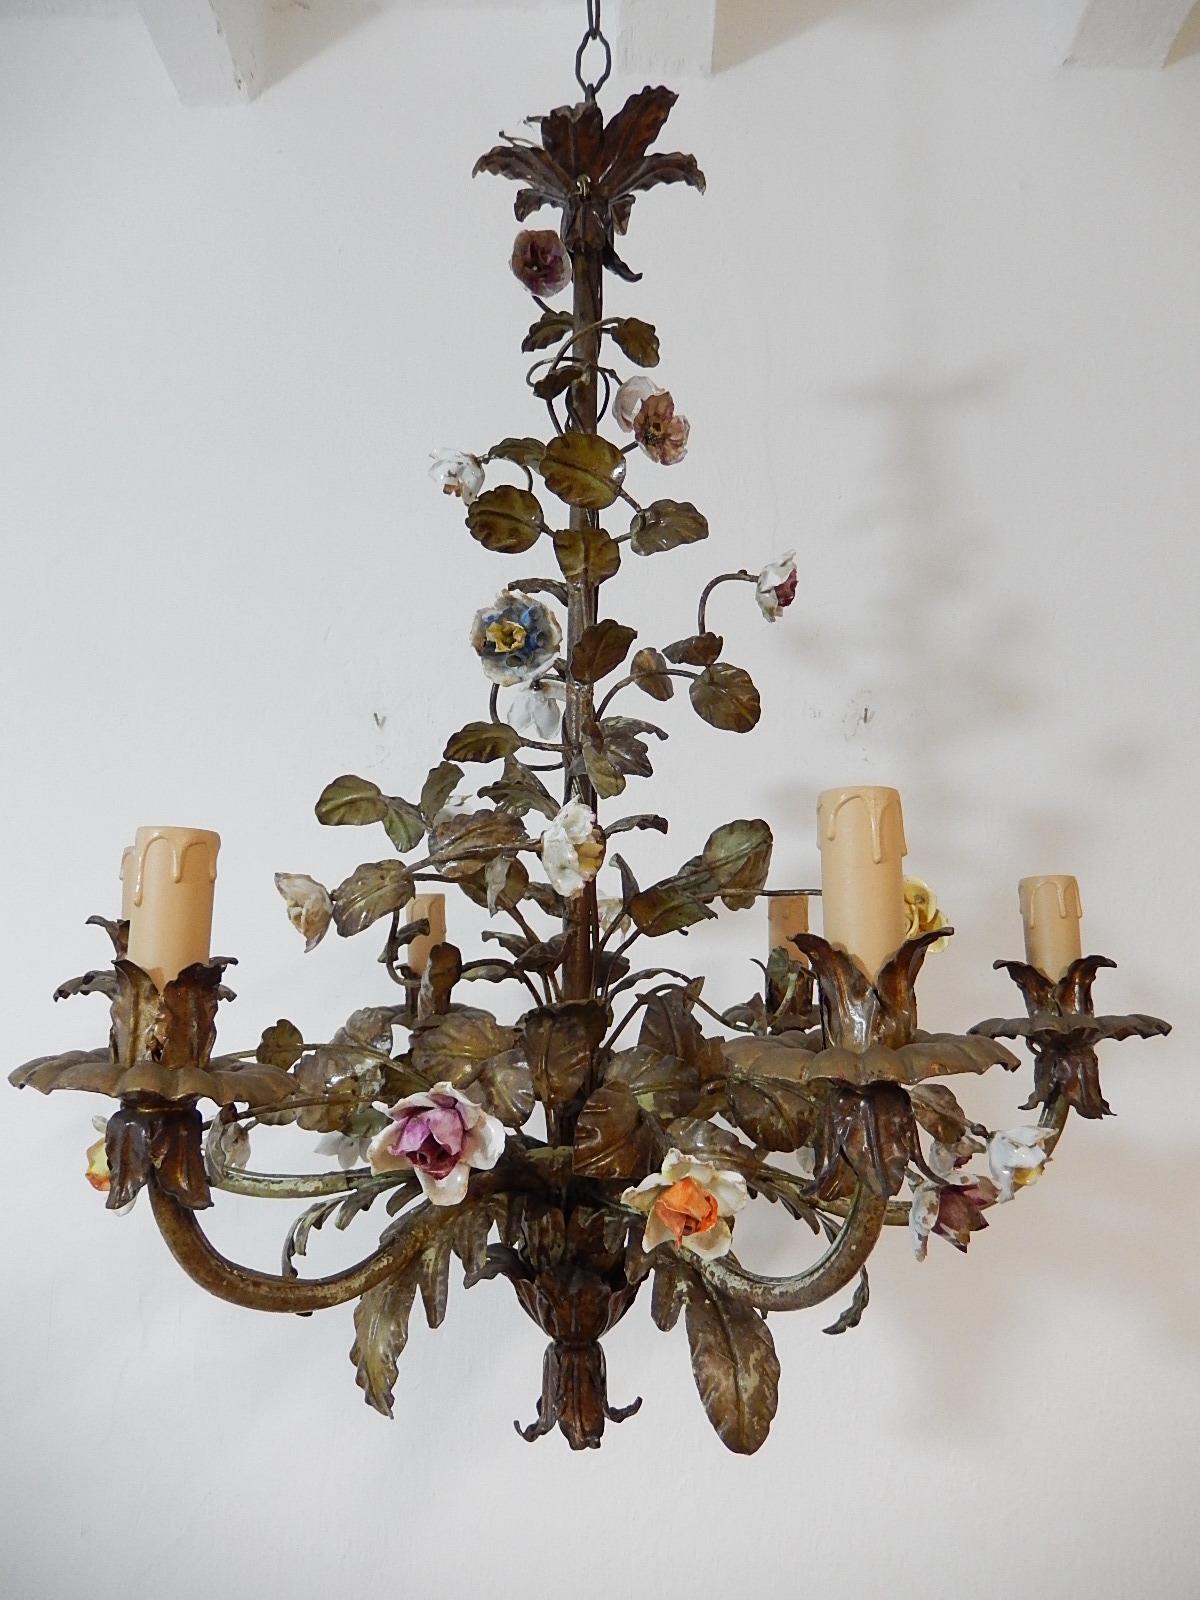 Housing 6 lights, will be rewired with appropriate sockets to country and ready to hang. Original spotty color tole leaves. Gorgeous handmade roses and flowers! All intact. Gold gilded accents. Adding 12” of original chain. Free priority shipping